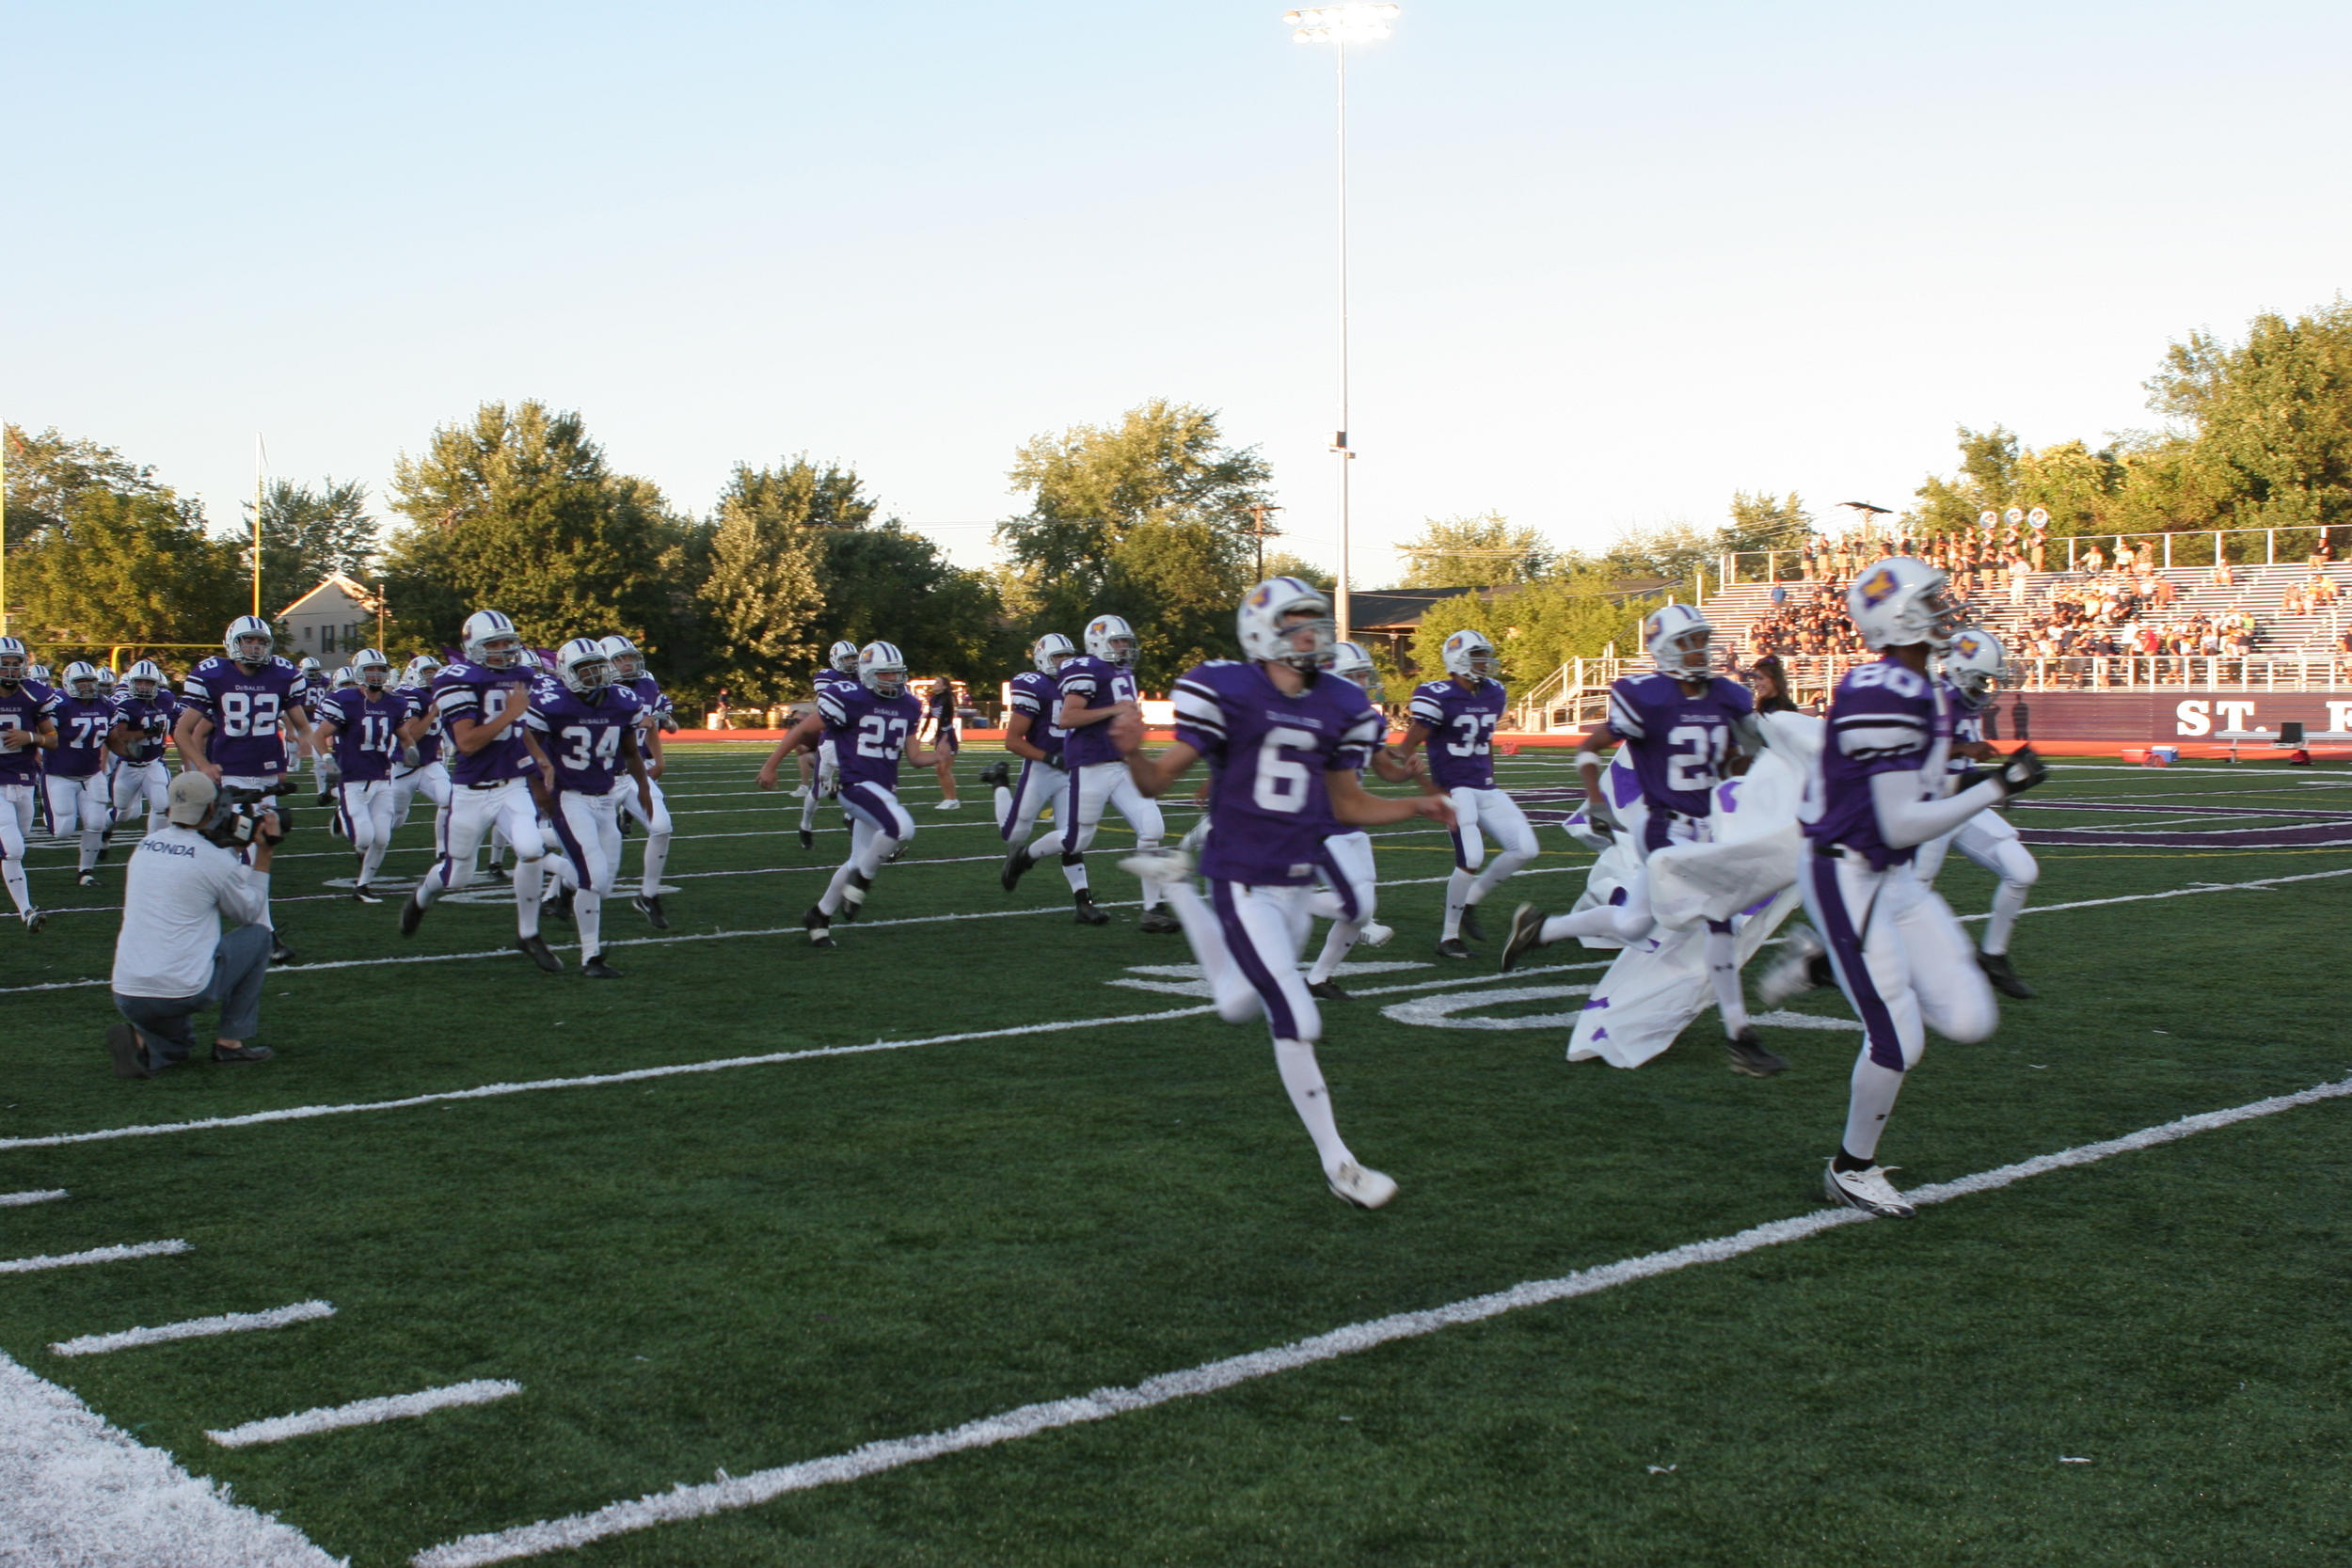 Here come the Stallions!